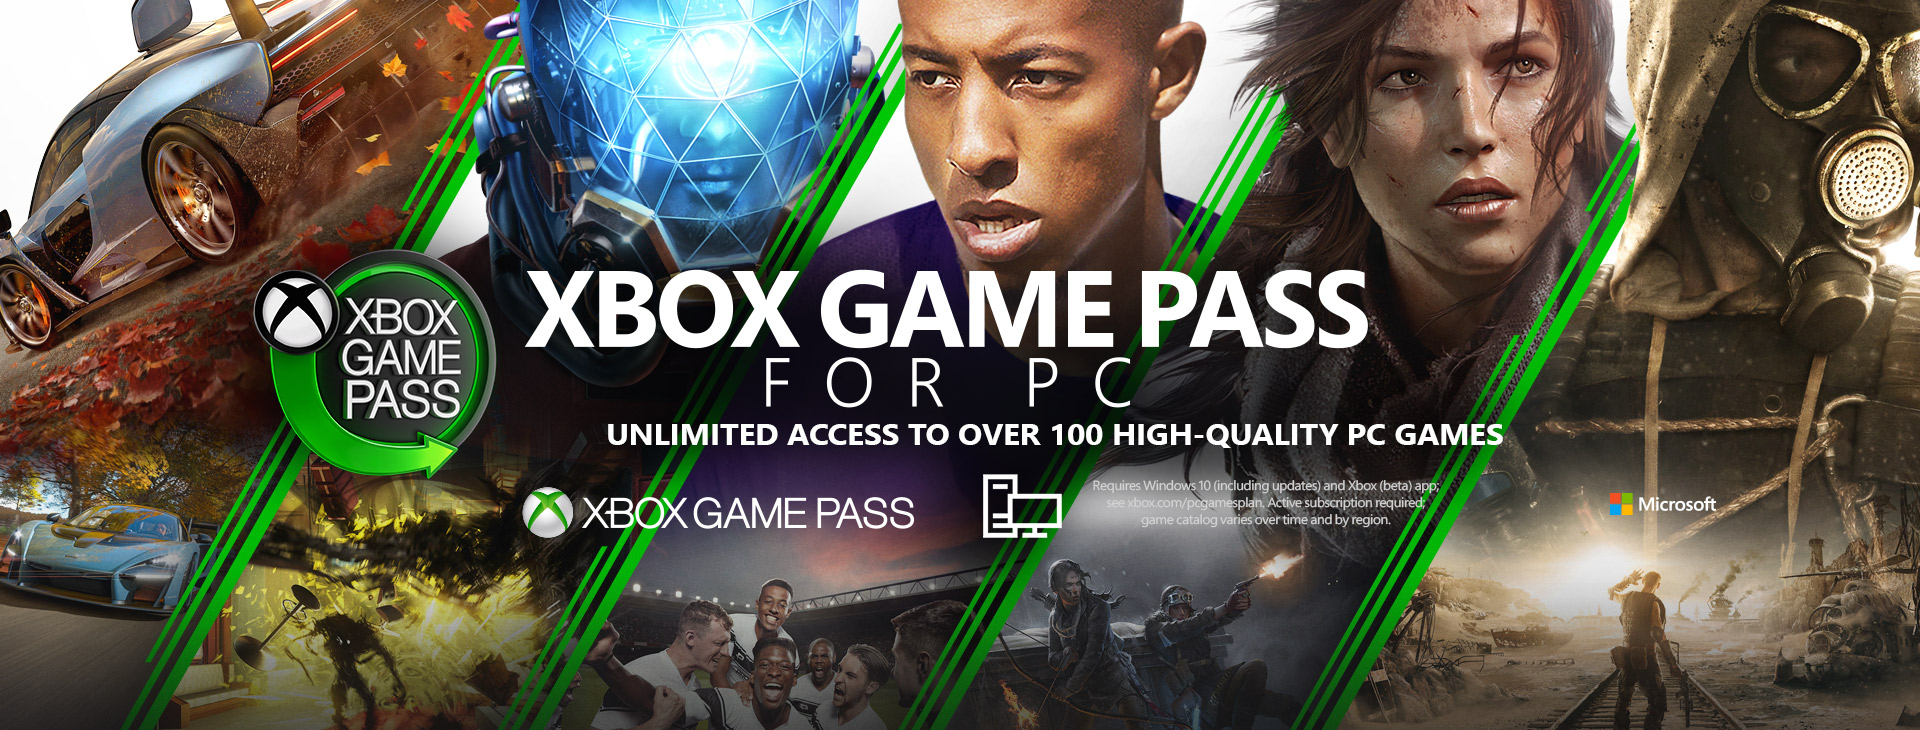 game pass for windows